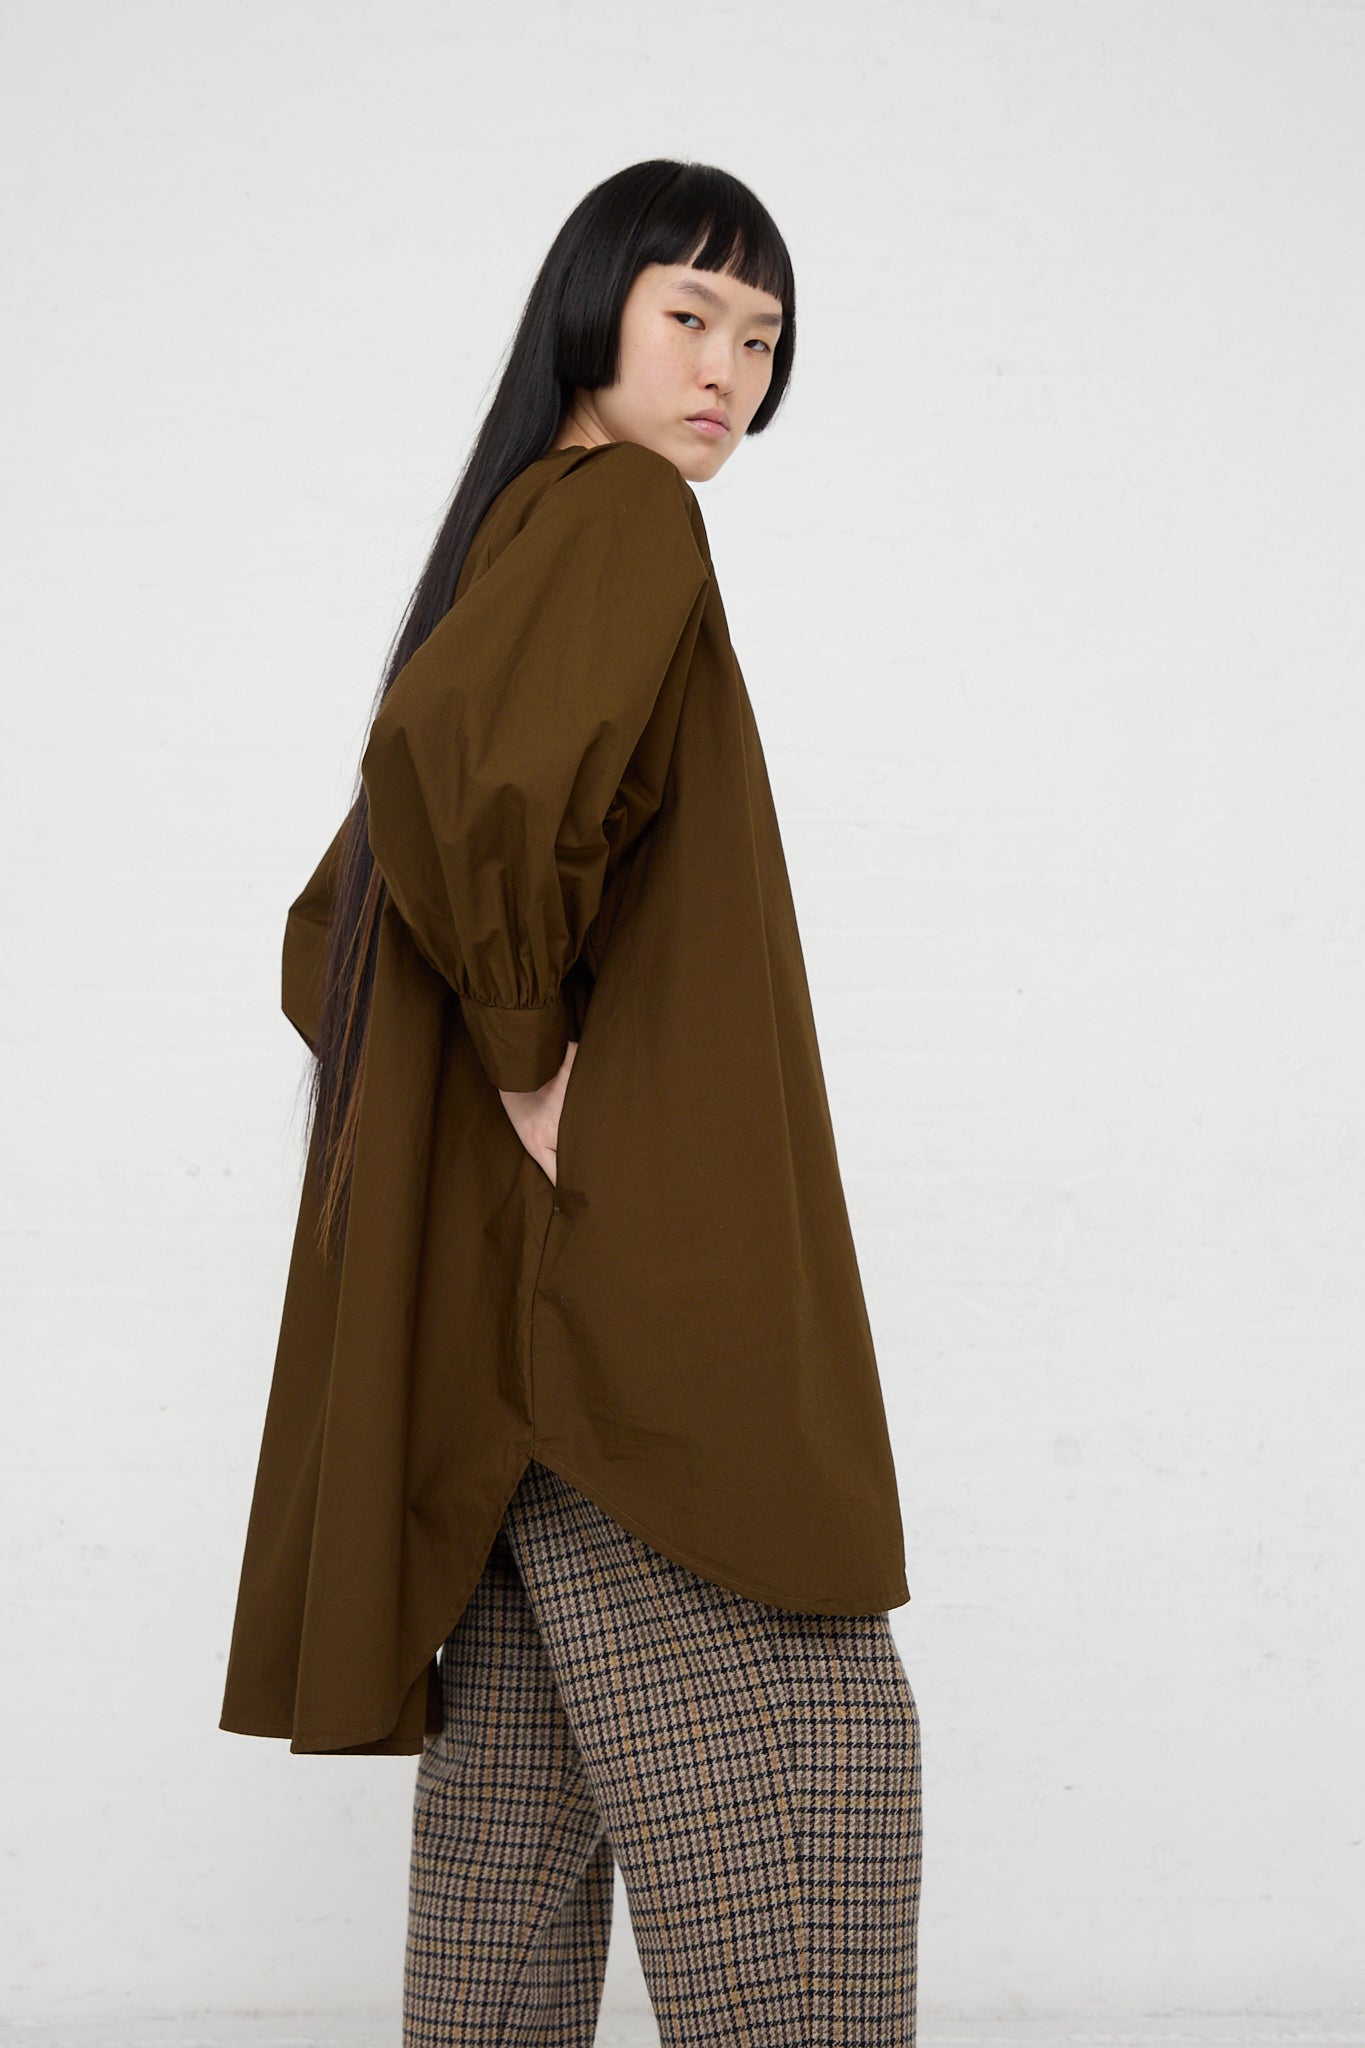 The model is wearing a Ichi woven cotton shirt in seal brown with a wide band collar. Side view.